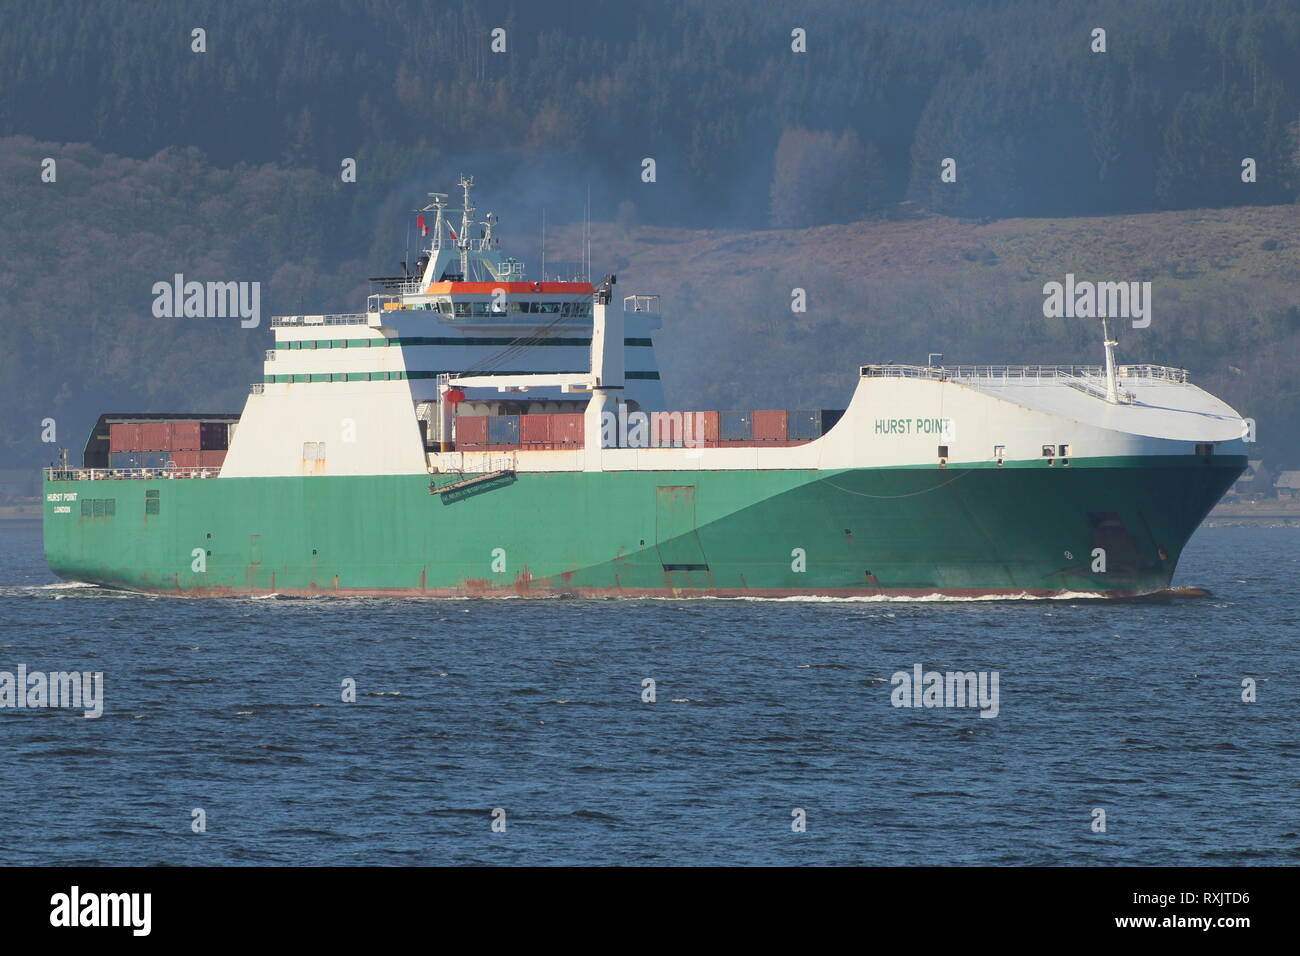 MV Hurst Point, a Point-class sealift ship operated by Foreland Shipping Limited for the Ministry of Defence, inbound to Glenmallan on Loch Long. Stock Photo